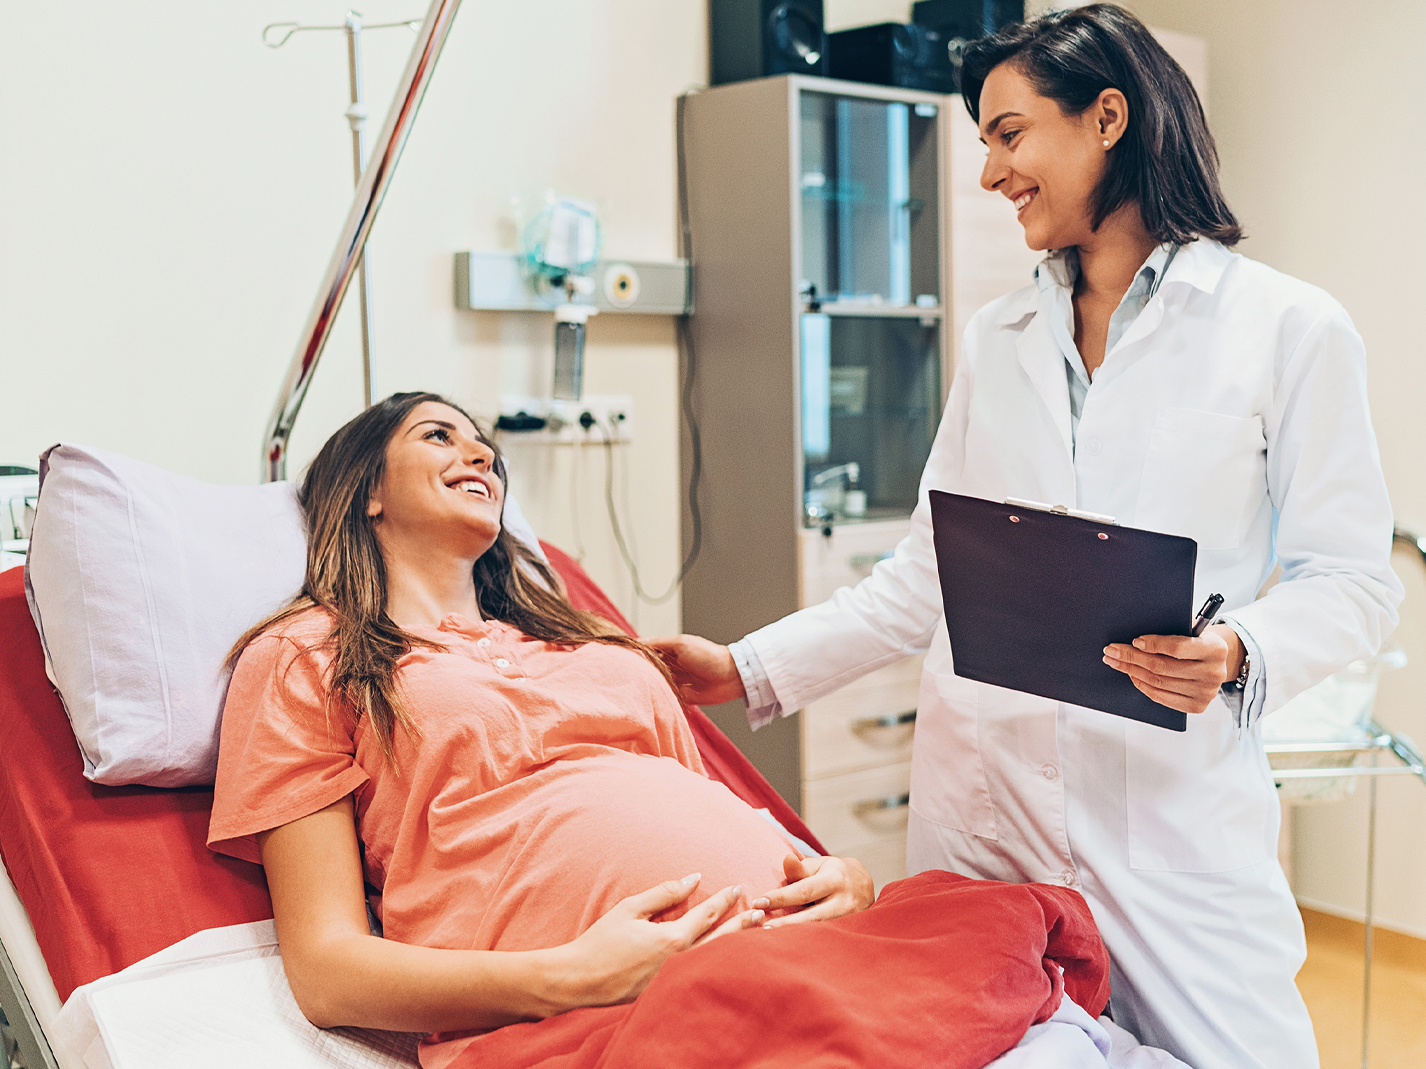 https://www.cedars-sinai.org/content/dam/cedars-sinai/programs-and-services/obgyn/maternity/labor-and-delivery-dt-2x.jpg